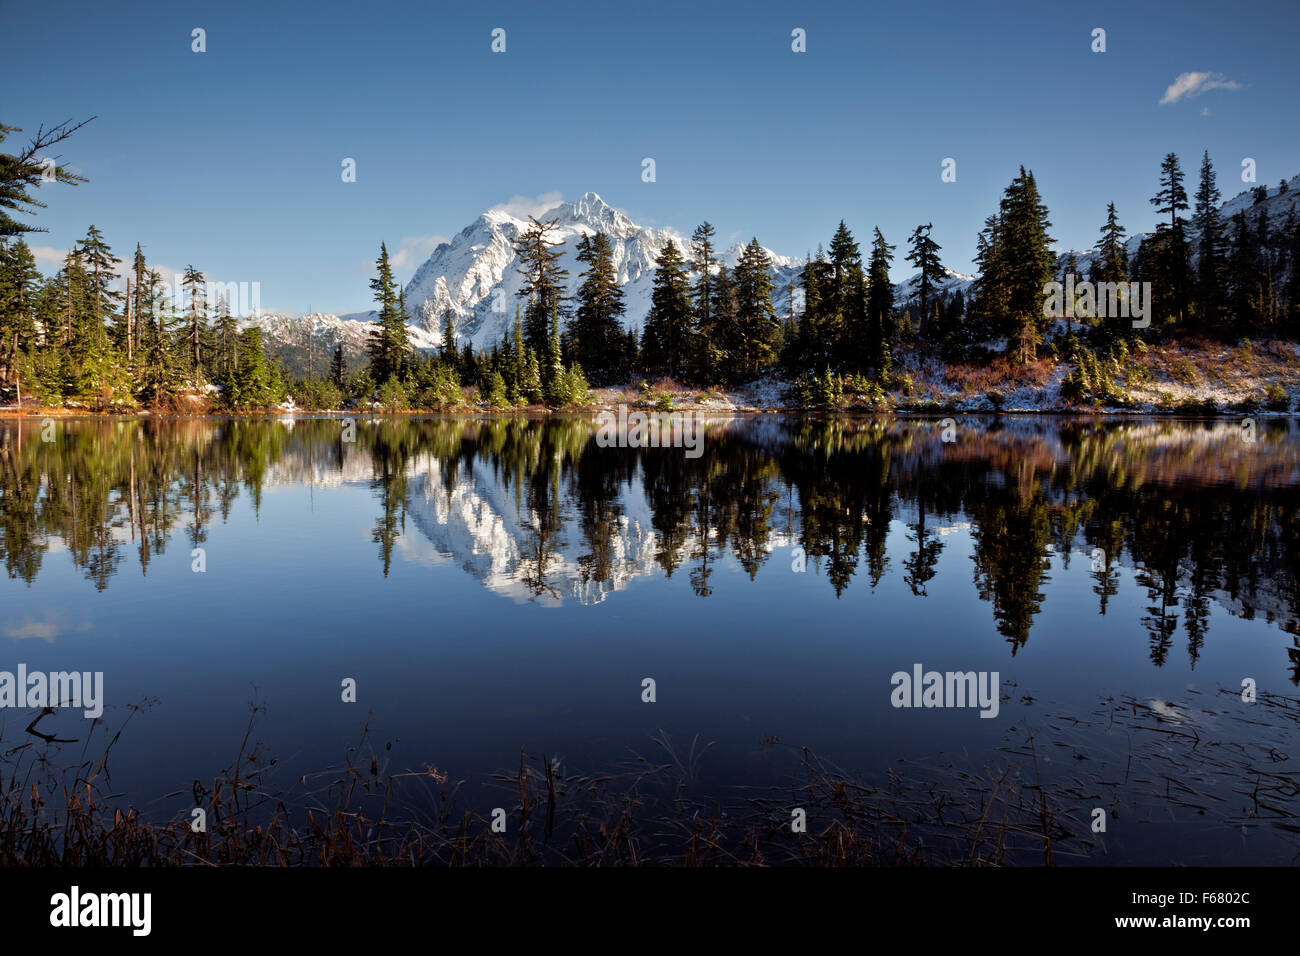 WA10987-00...WASHINGTON - Mount Shuksan reflecting in Highwood Lake in the Heather Meadows Recreation Area in the North Cascades Stock Photo